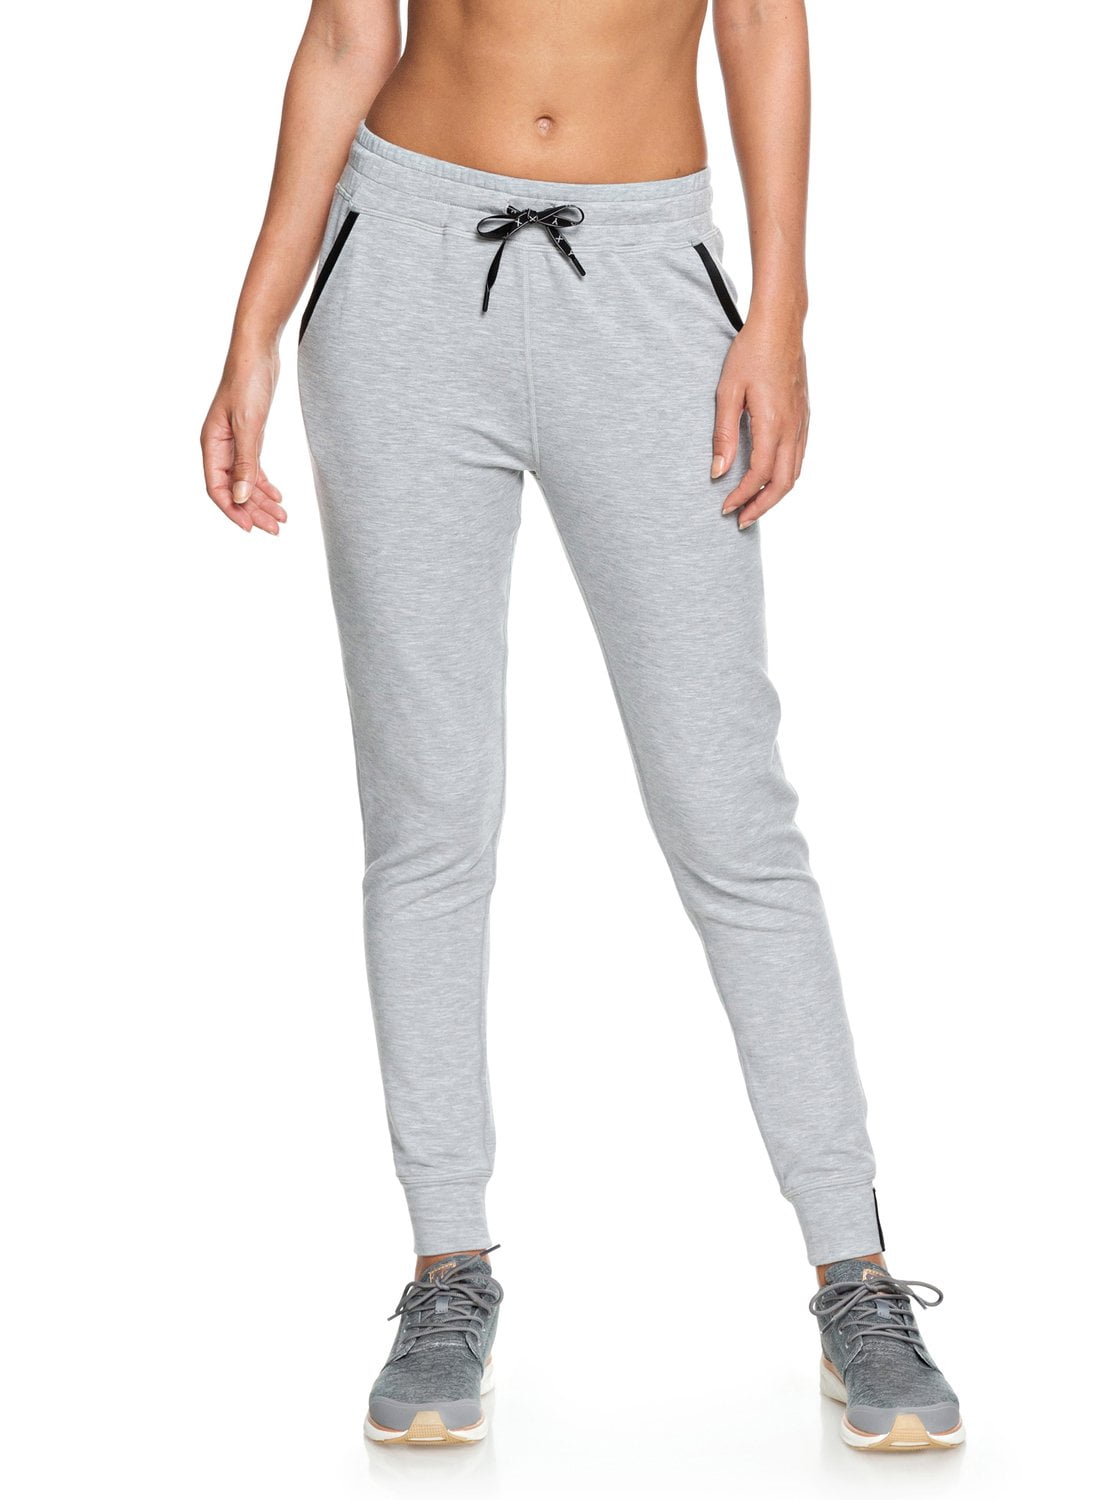 Roxy Womens Down Town With Me Fleece Joggers - Heather Gray